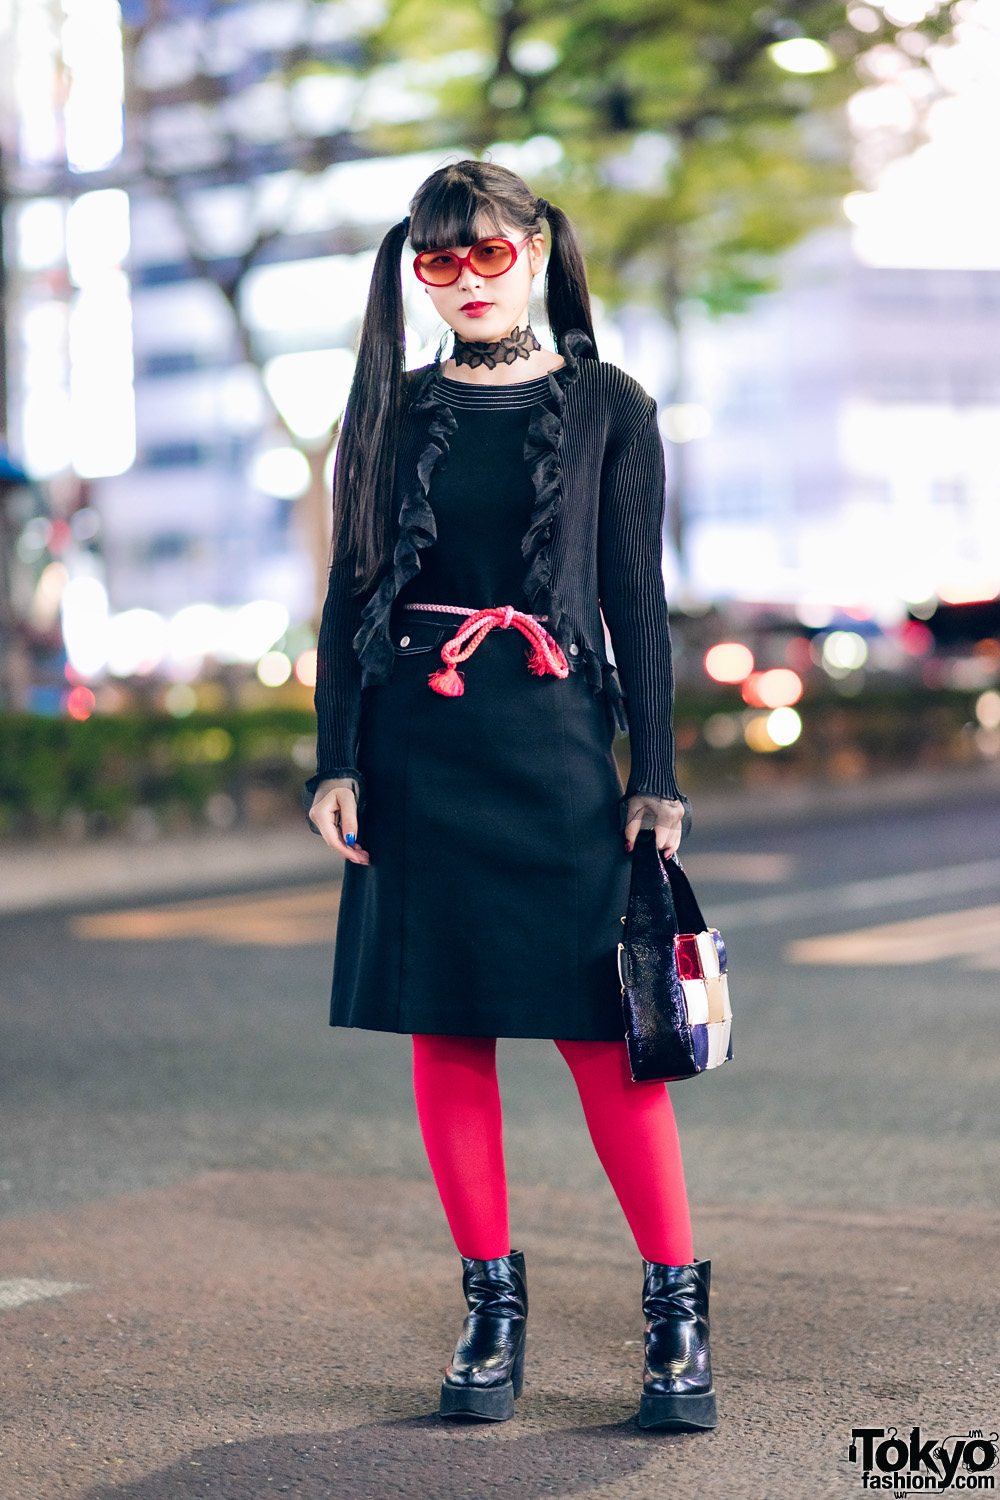 Red & Black Harajuku Street Style w/ Twin Tails, Belted Dress, Ruffle Cardigan, Patchwork Bag & Pointy Boots